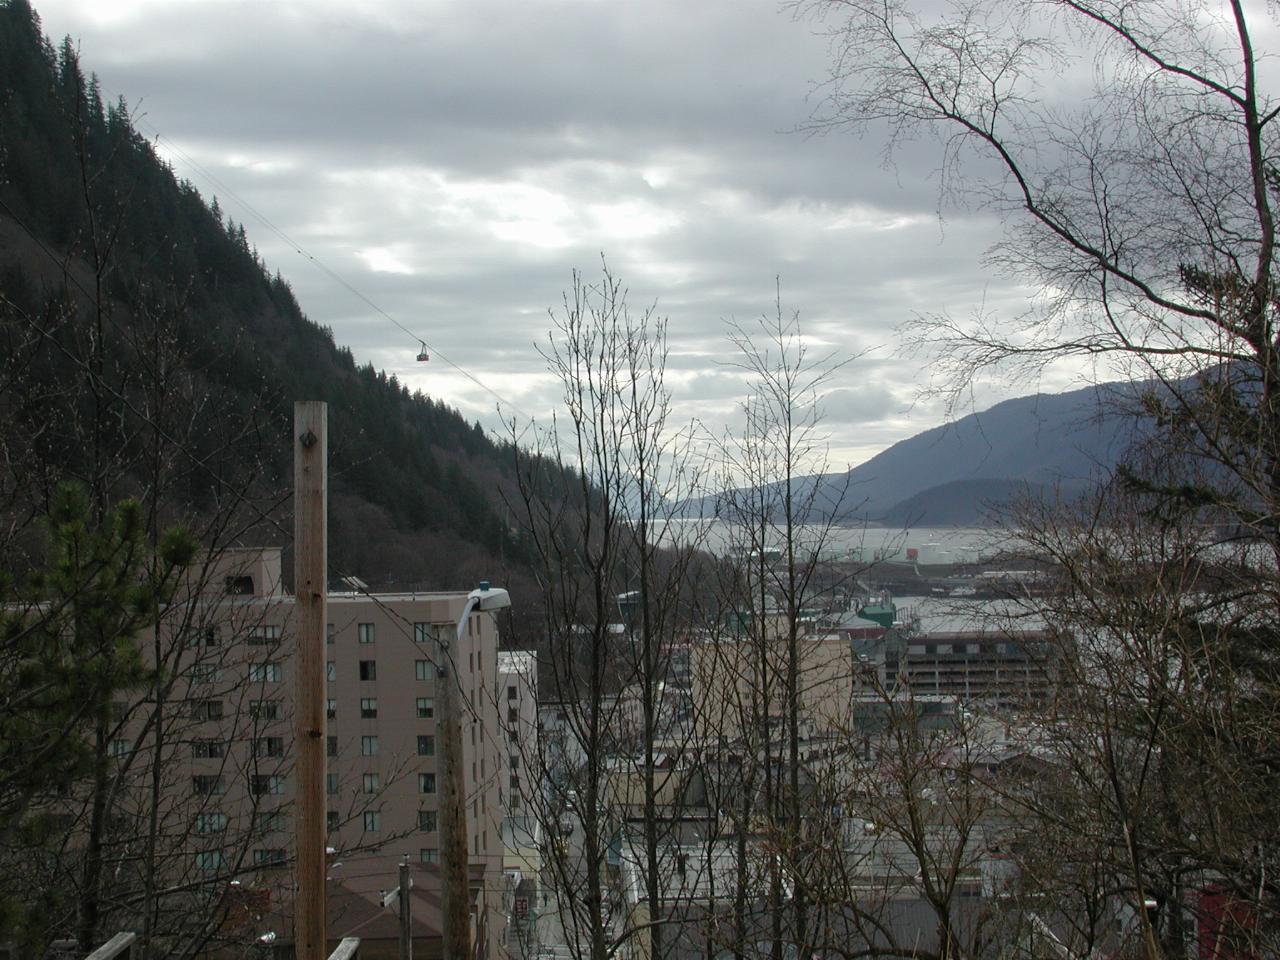 Downtown Juneau and Gastineau Channel, and cable car is operating